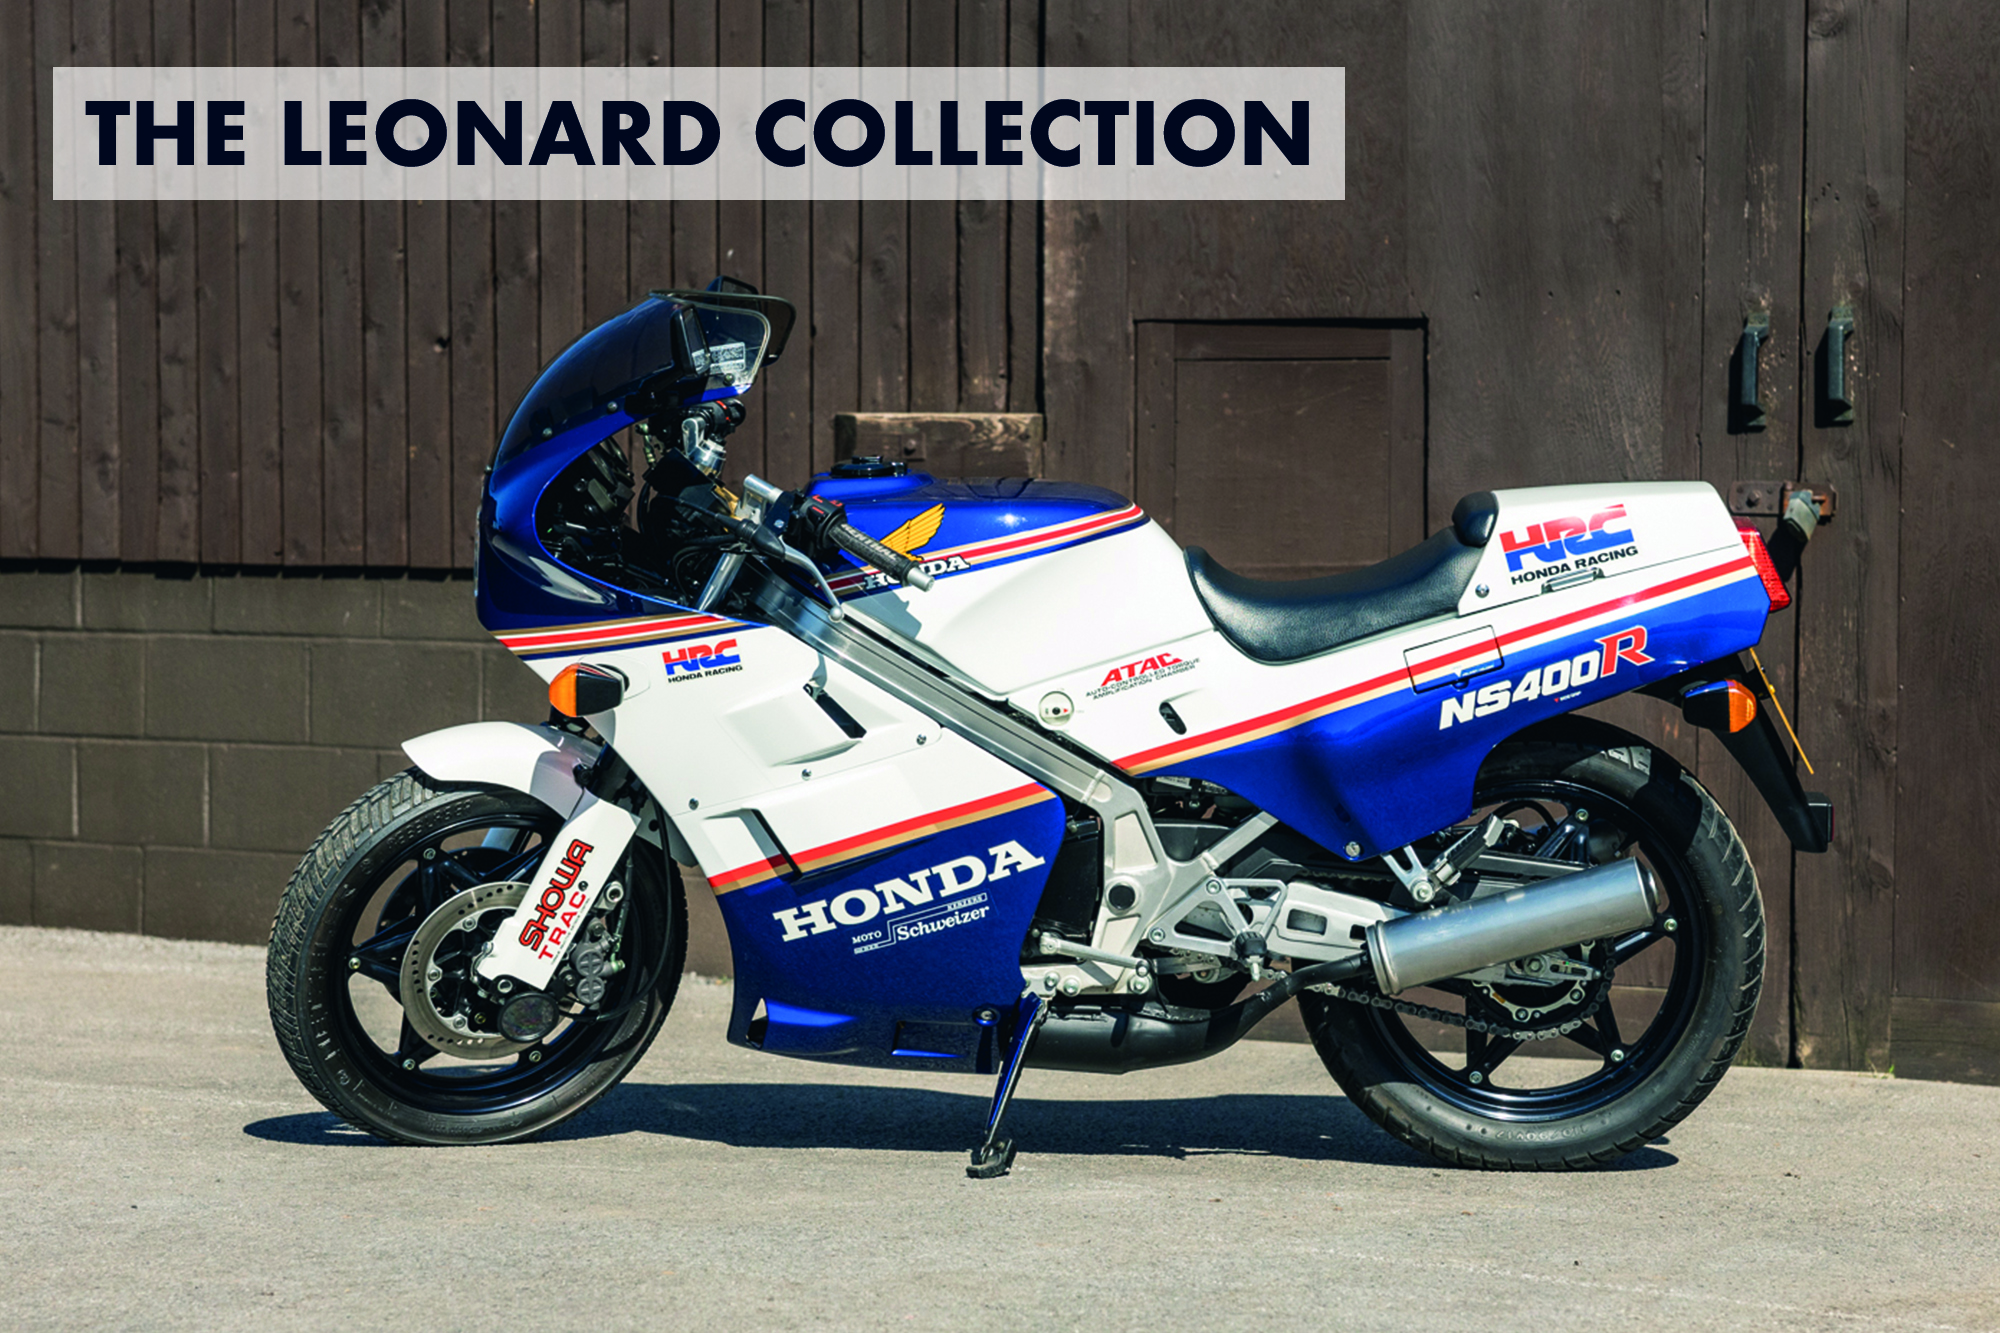 NO RESERVE: 1985 HONDA NS400R for sale by auction in North 